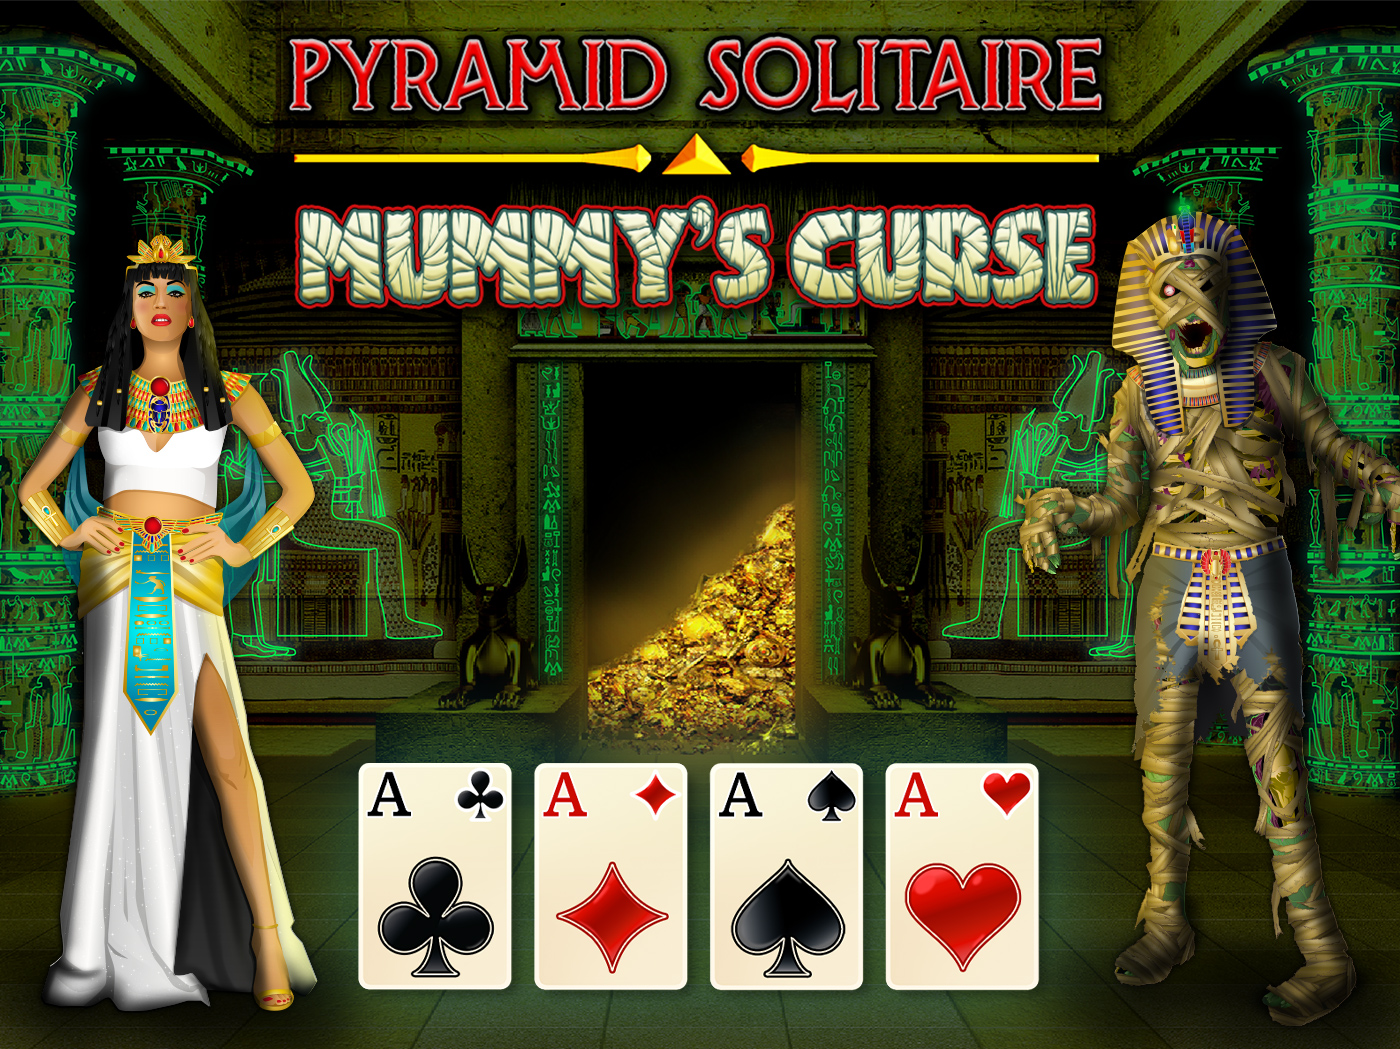 Pyramid Solitaire Mummy S Curse Glowing Eye Games,Mornay Sauce